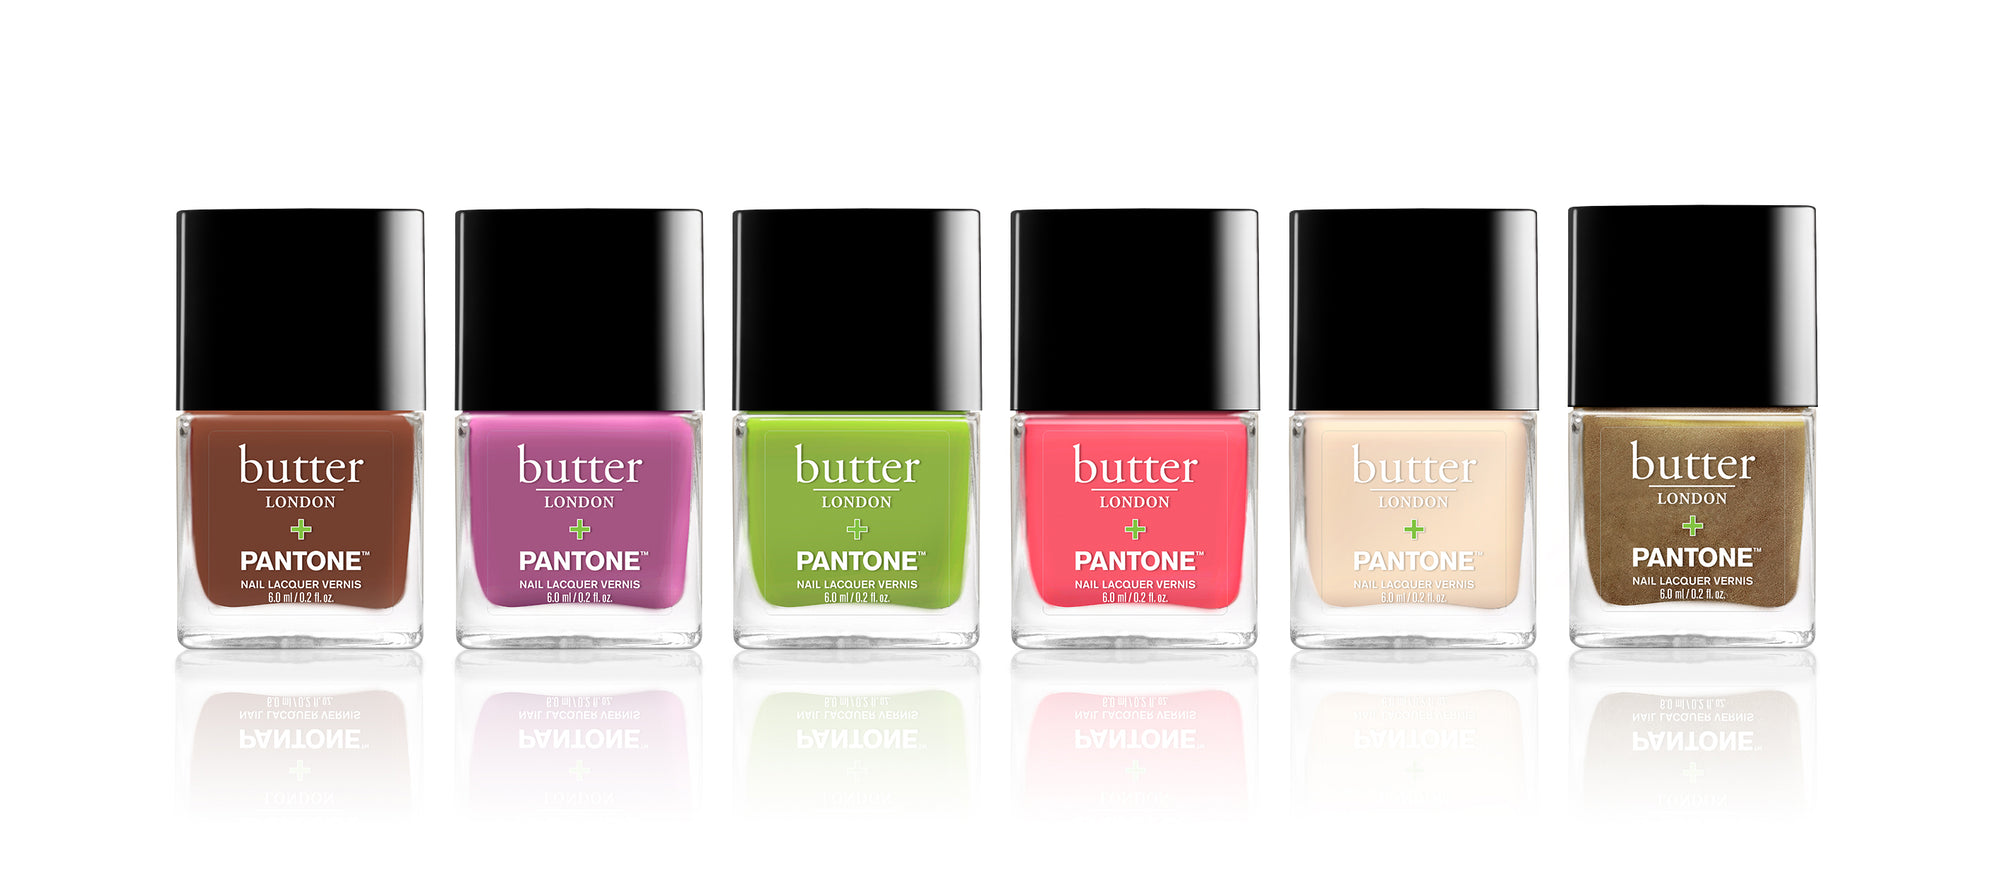 BUTTER LONDON’S TAKE ON CLEAN BEAUTY: EXPLAINED